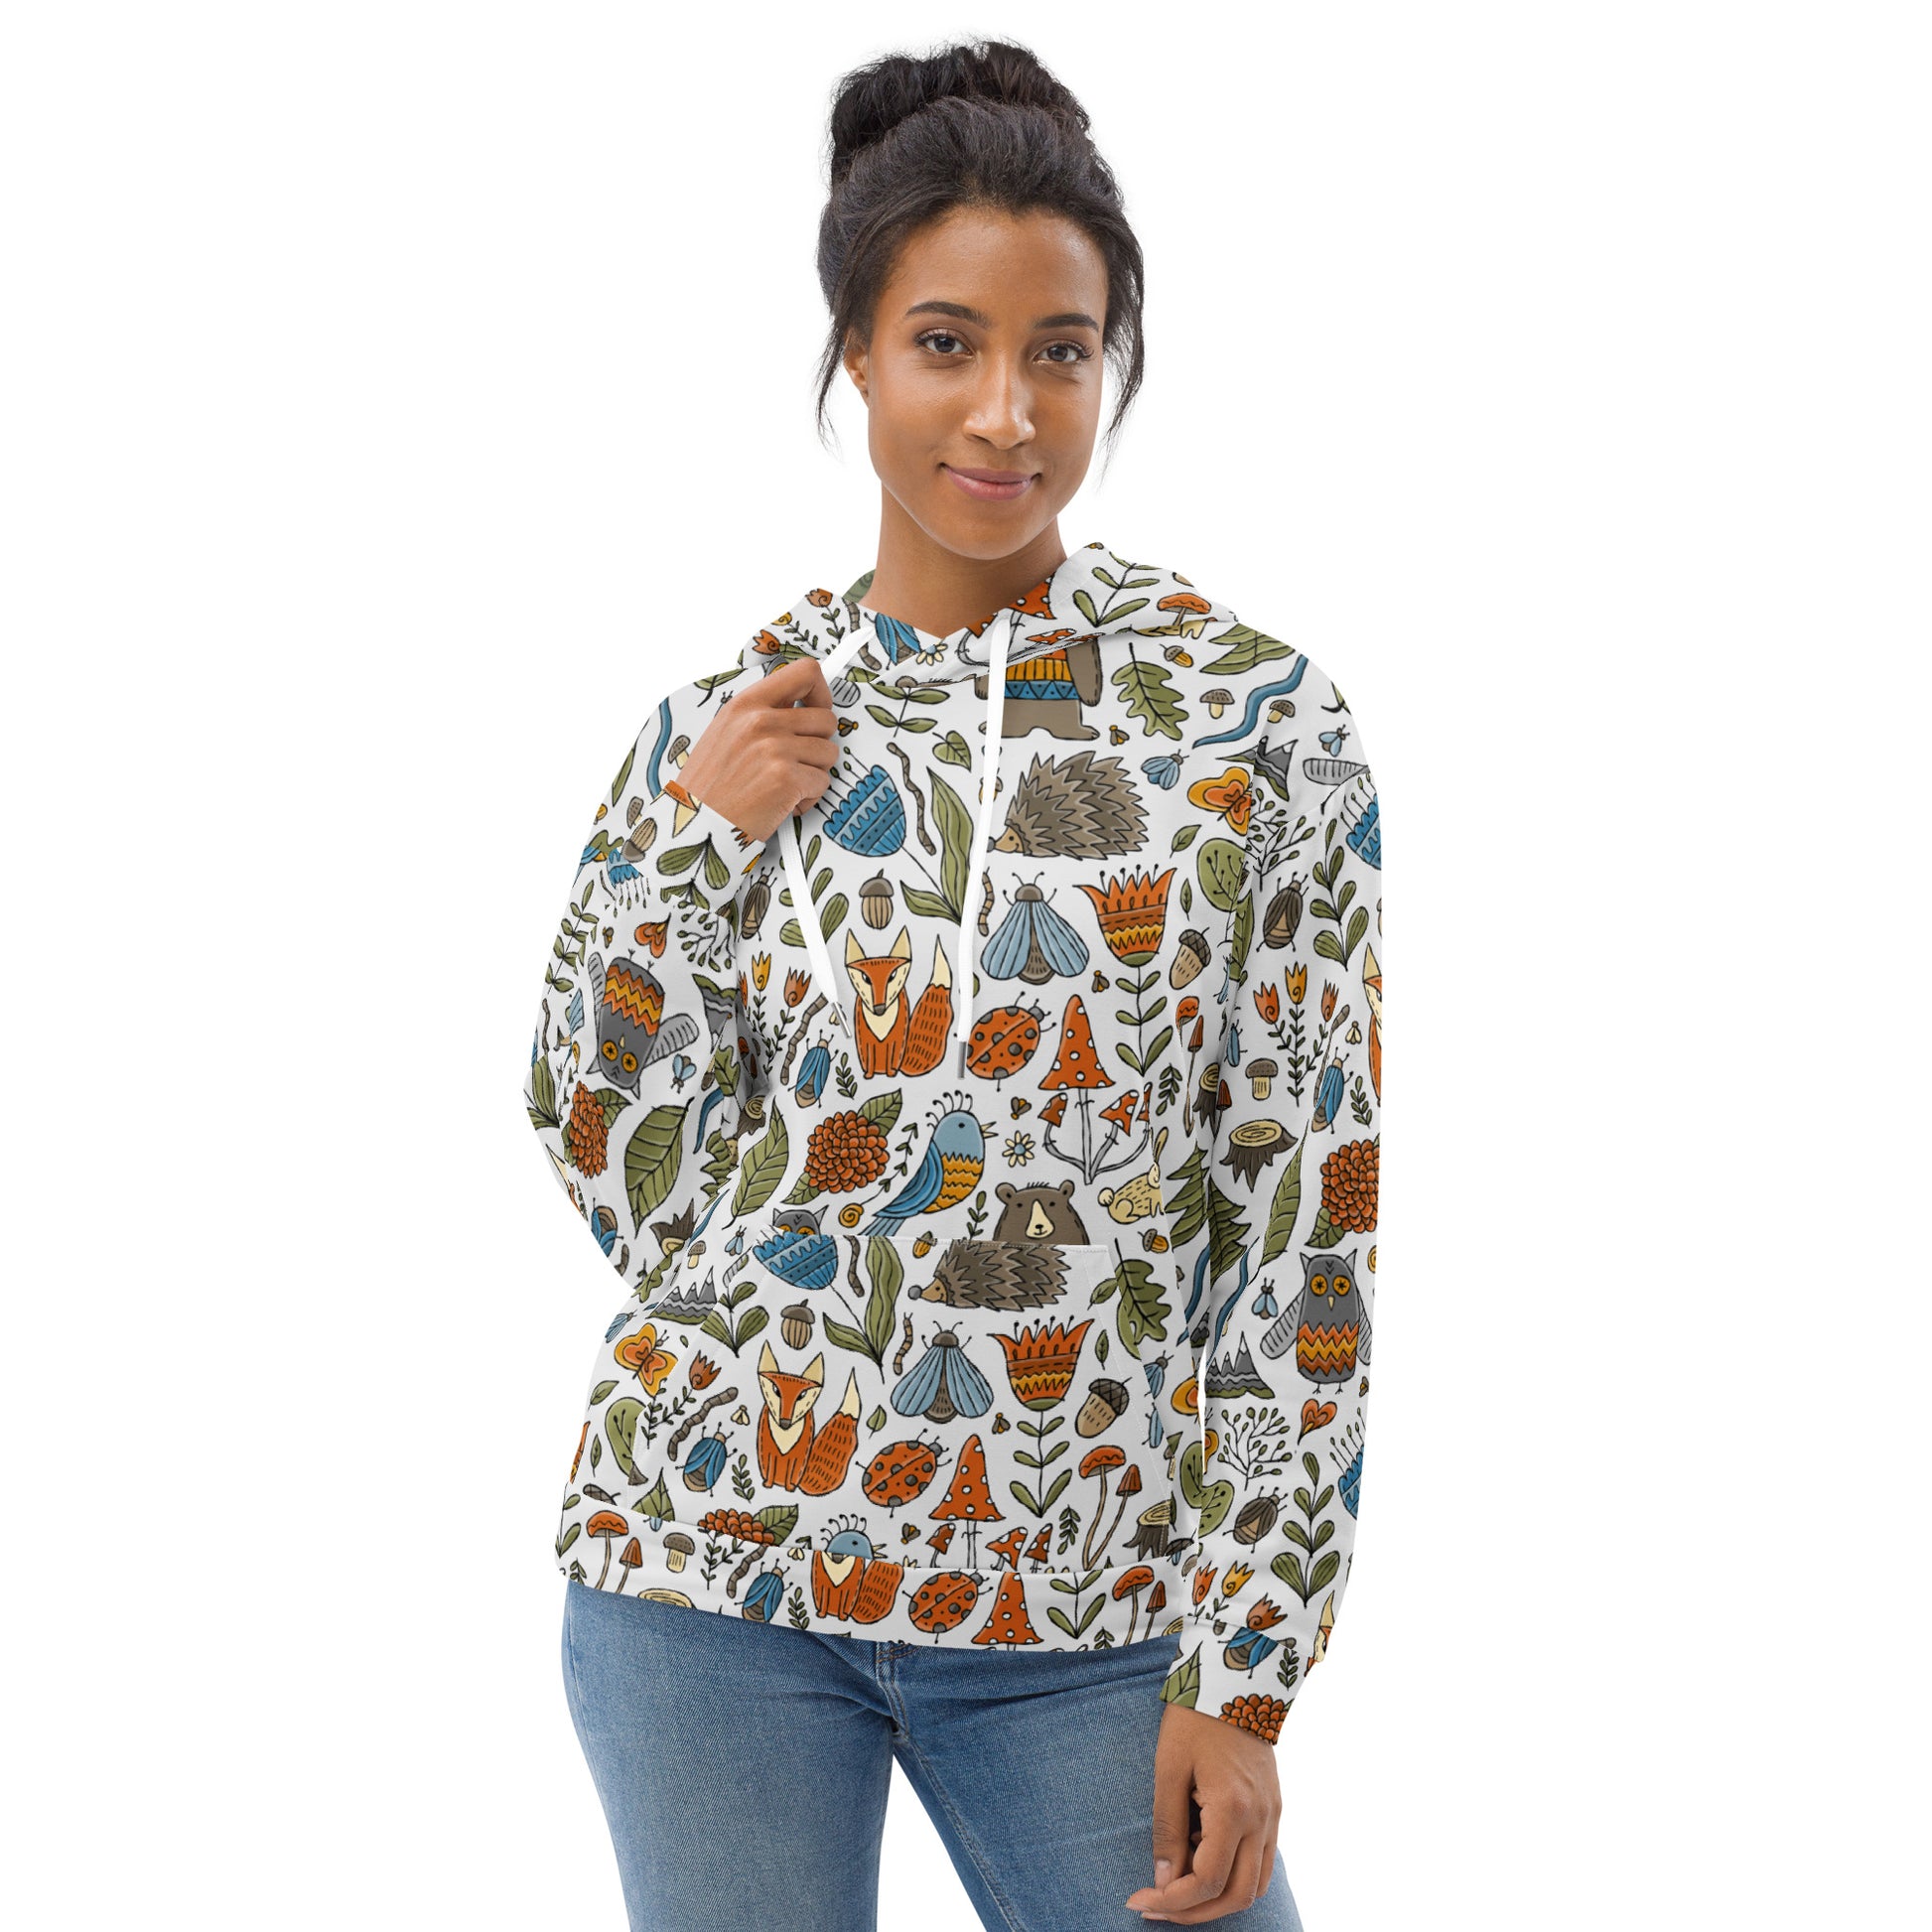 Woman wear in Artistic Designer Hoodie all over print vintage style with magic world illustration of forest - animals and birds flowers and nature bear fox owls butterflies hedgehog insects mashrooms and trees. Festival comfortable stylish wear trendy fashionable rare beautiful unique. Back side. Kudry